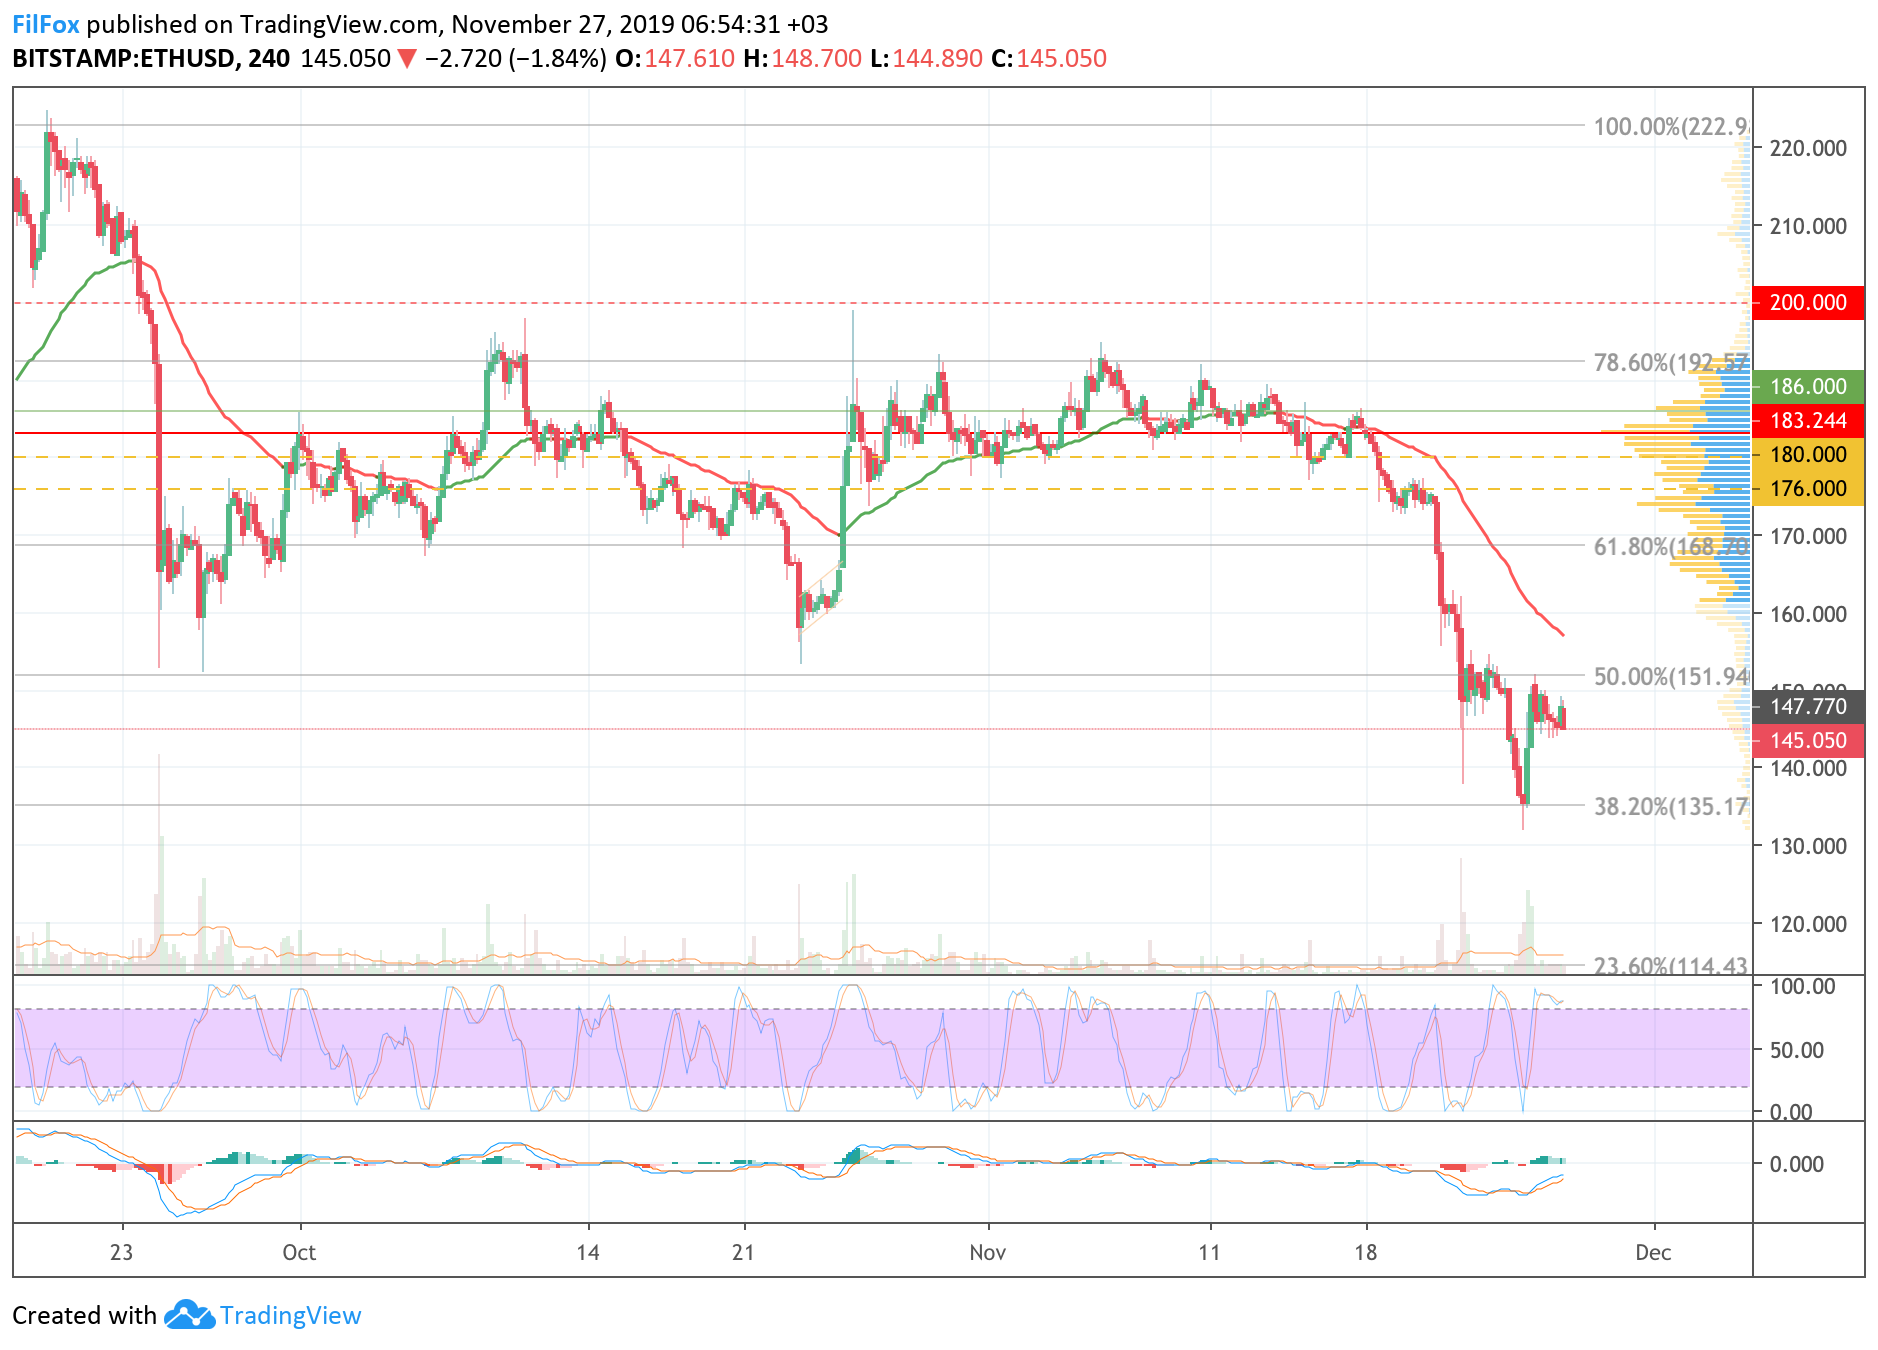 Analysis of cryptocurrency pairs BTC / USD, ETH / USD and XRP / USD on 11/27/2019